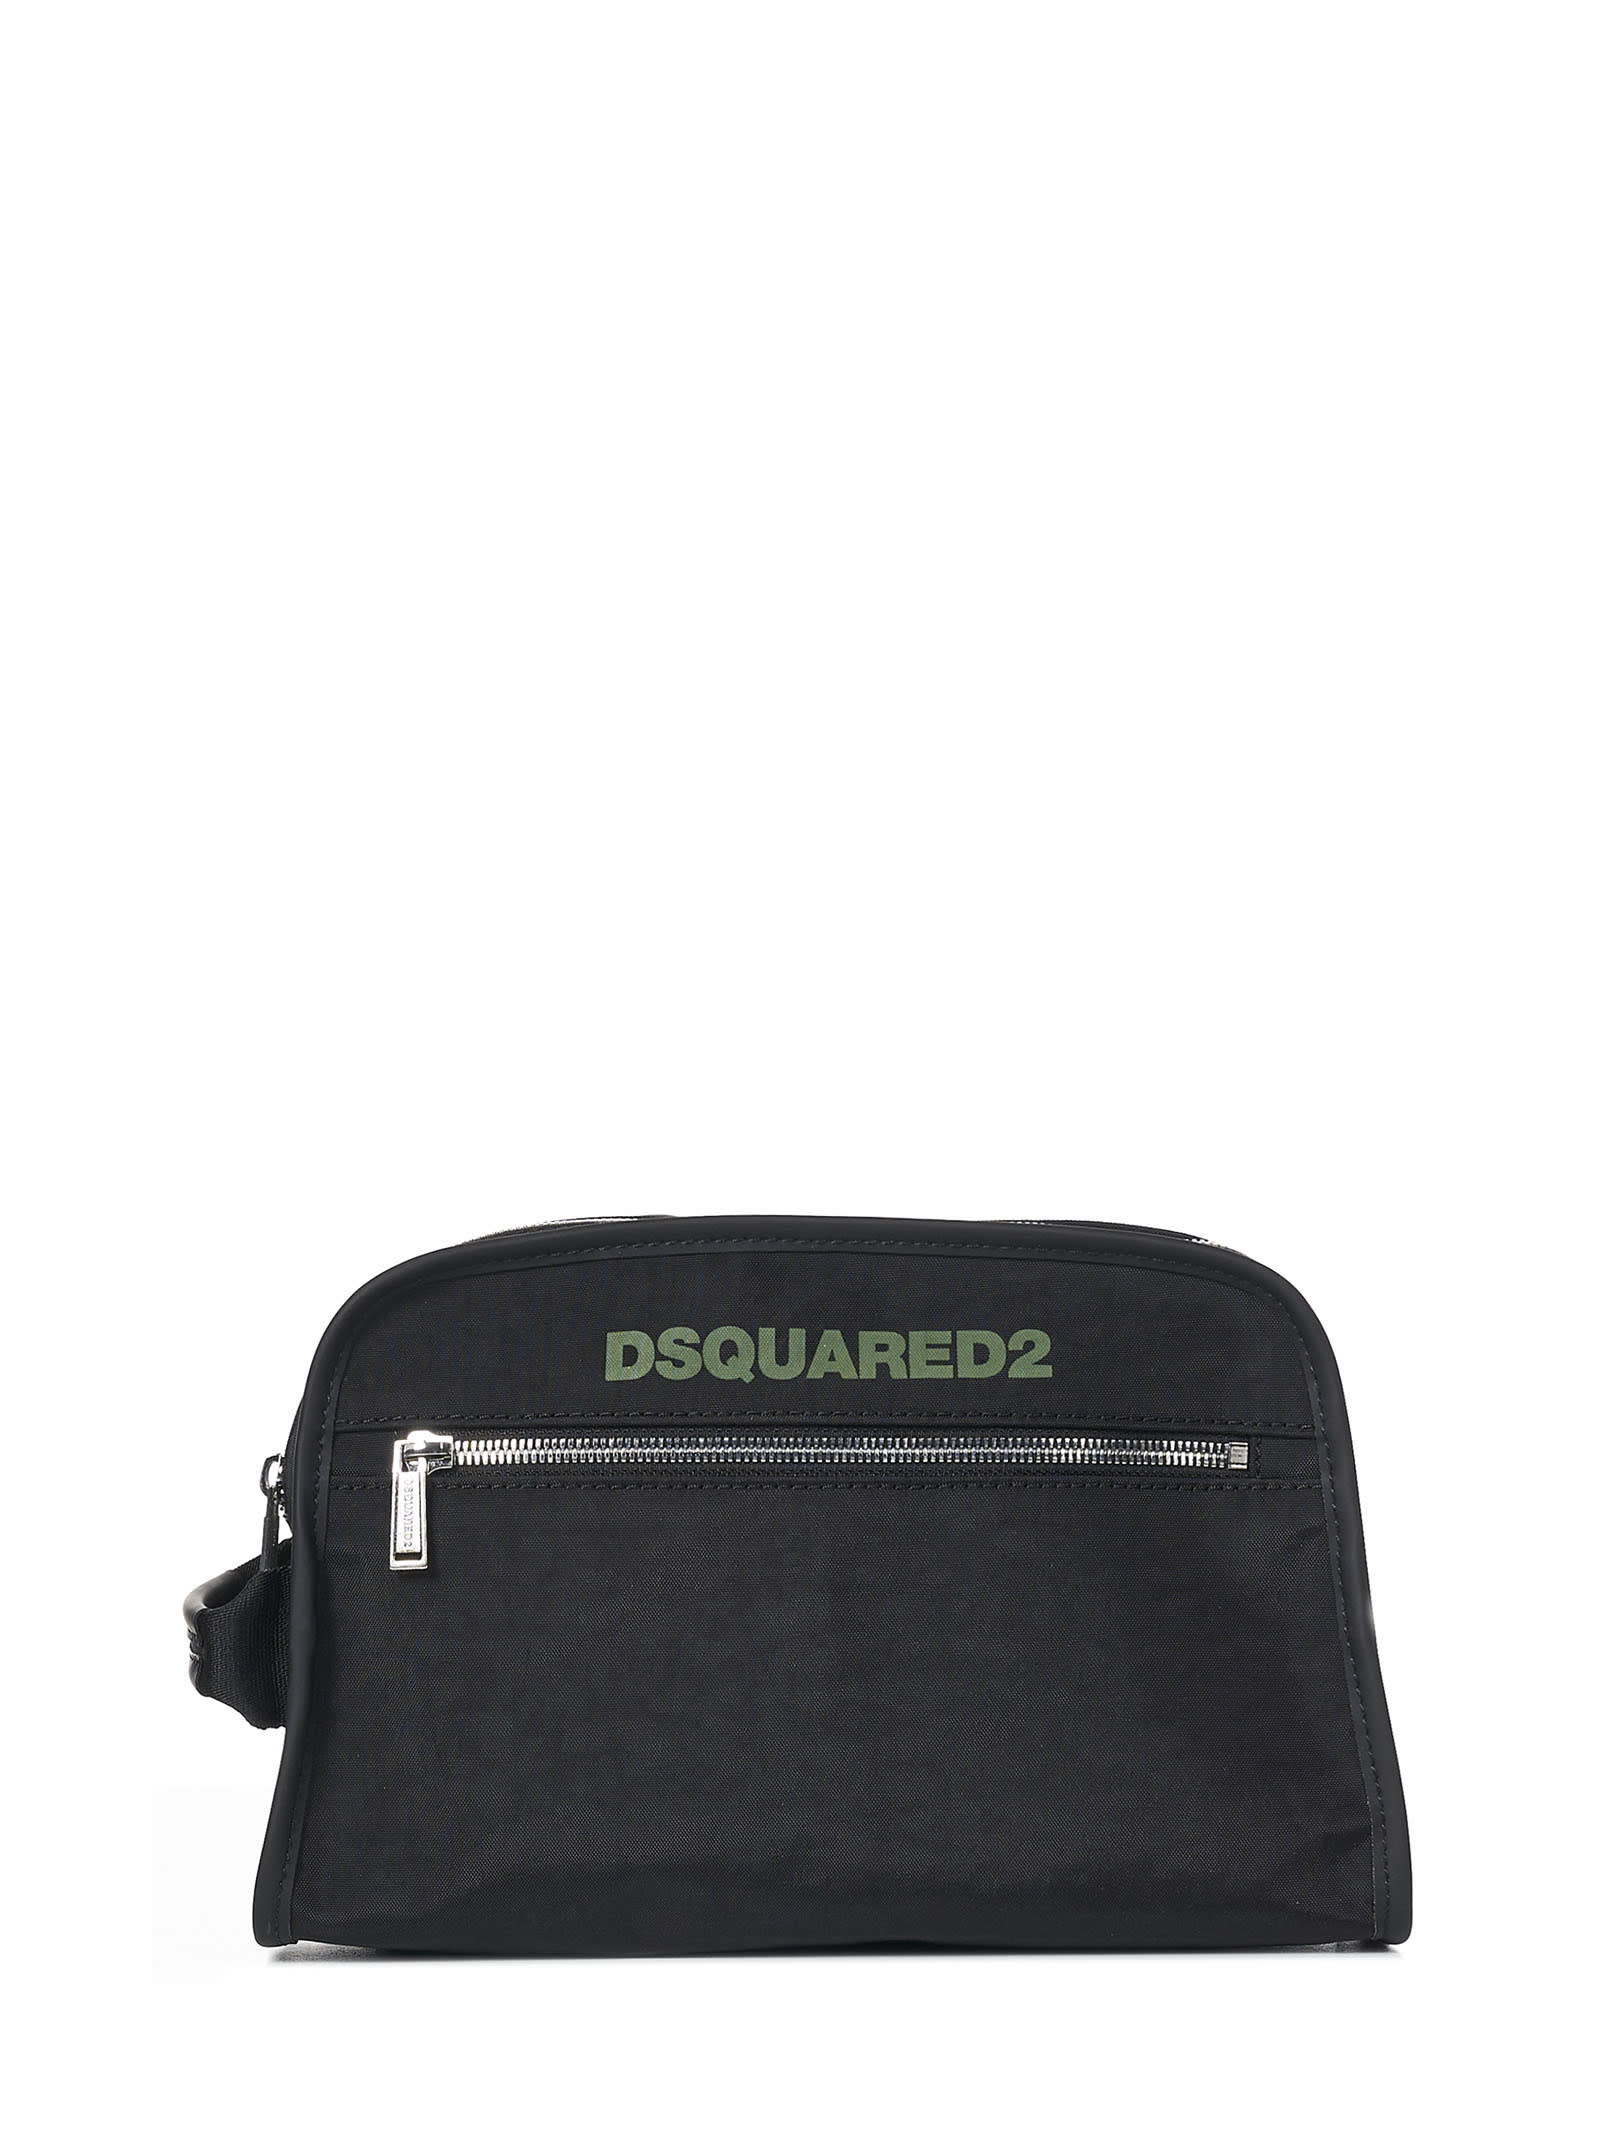 Dsquared2 70s Beauty